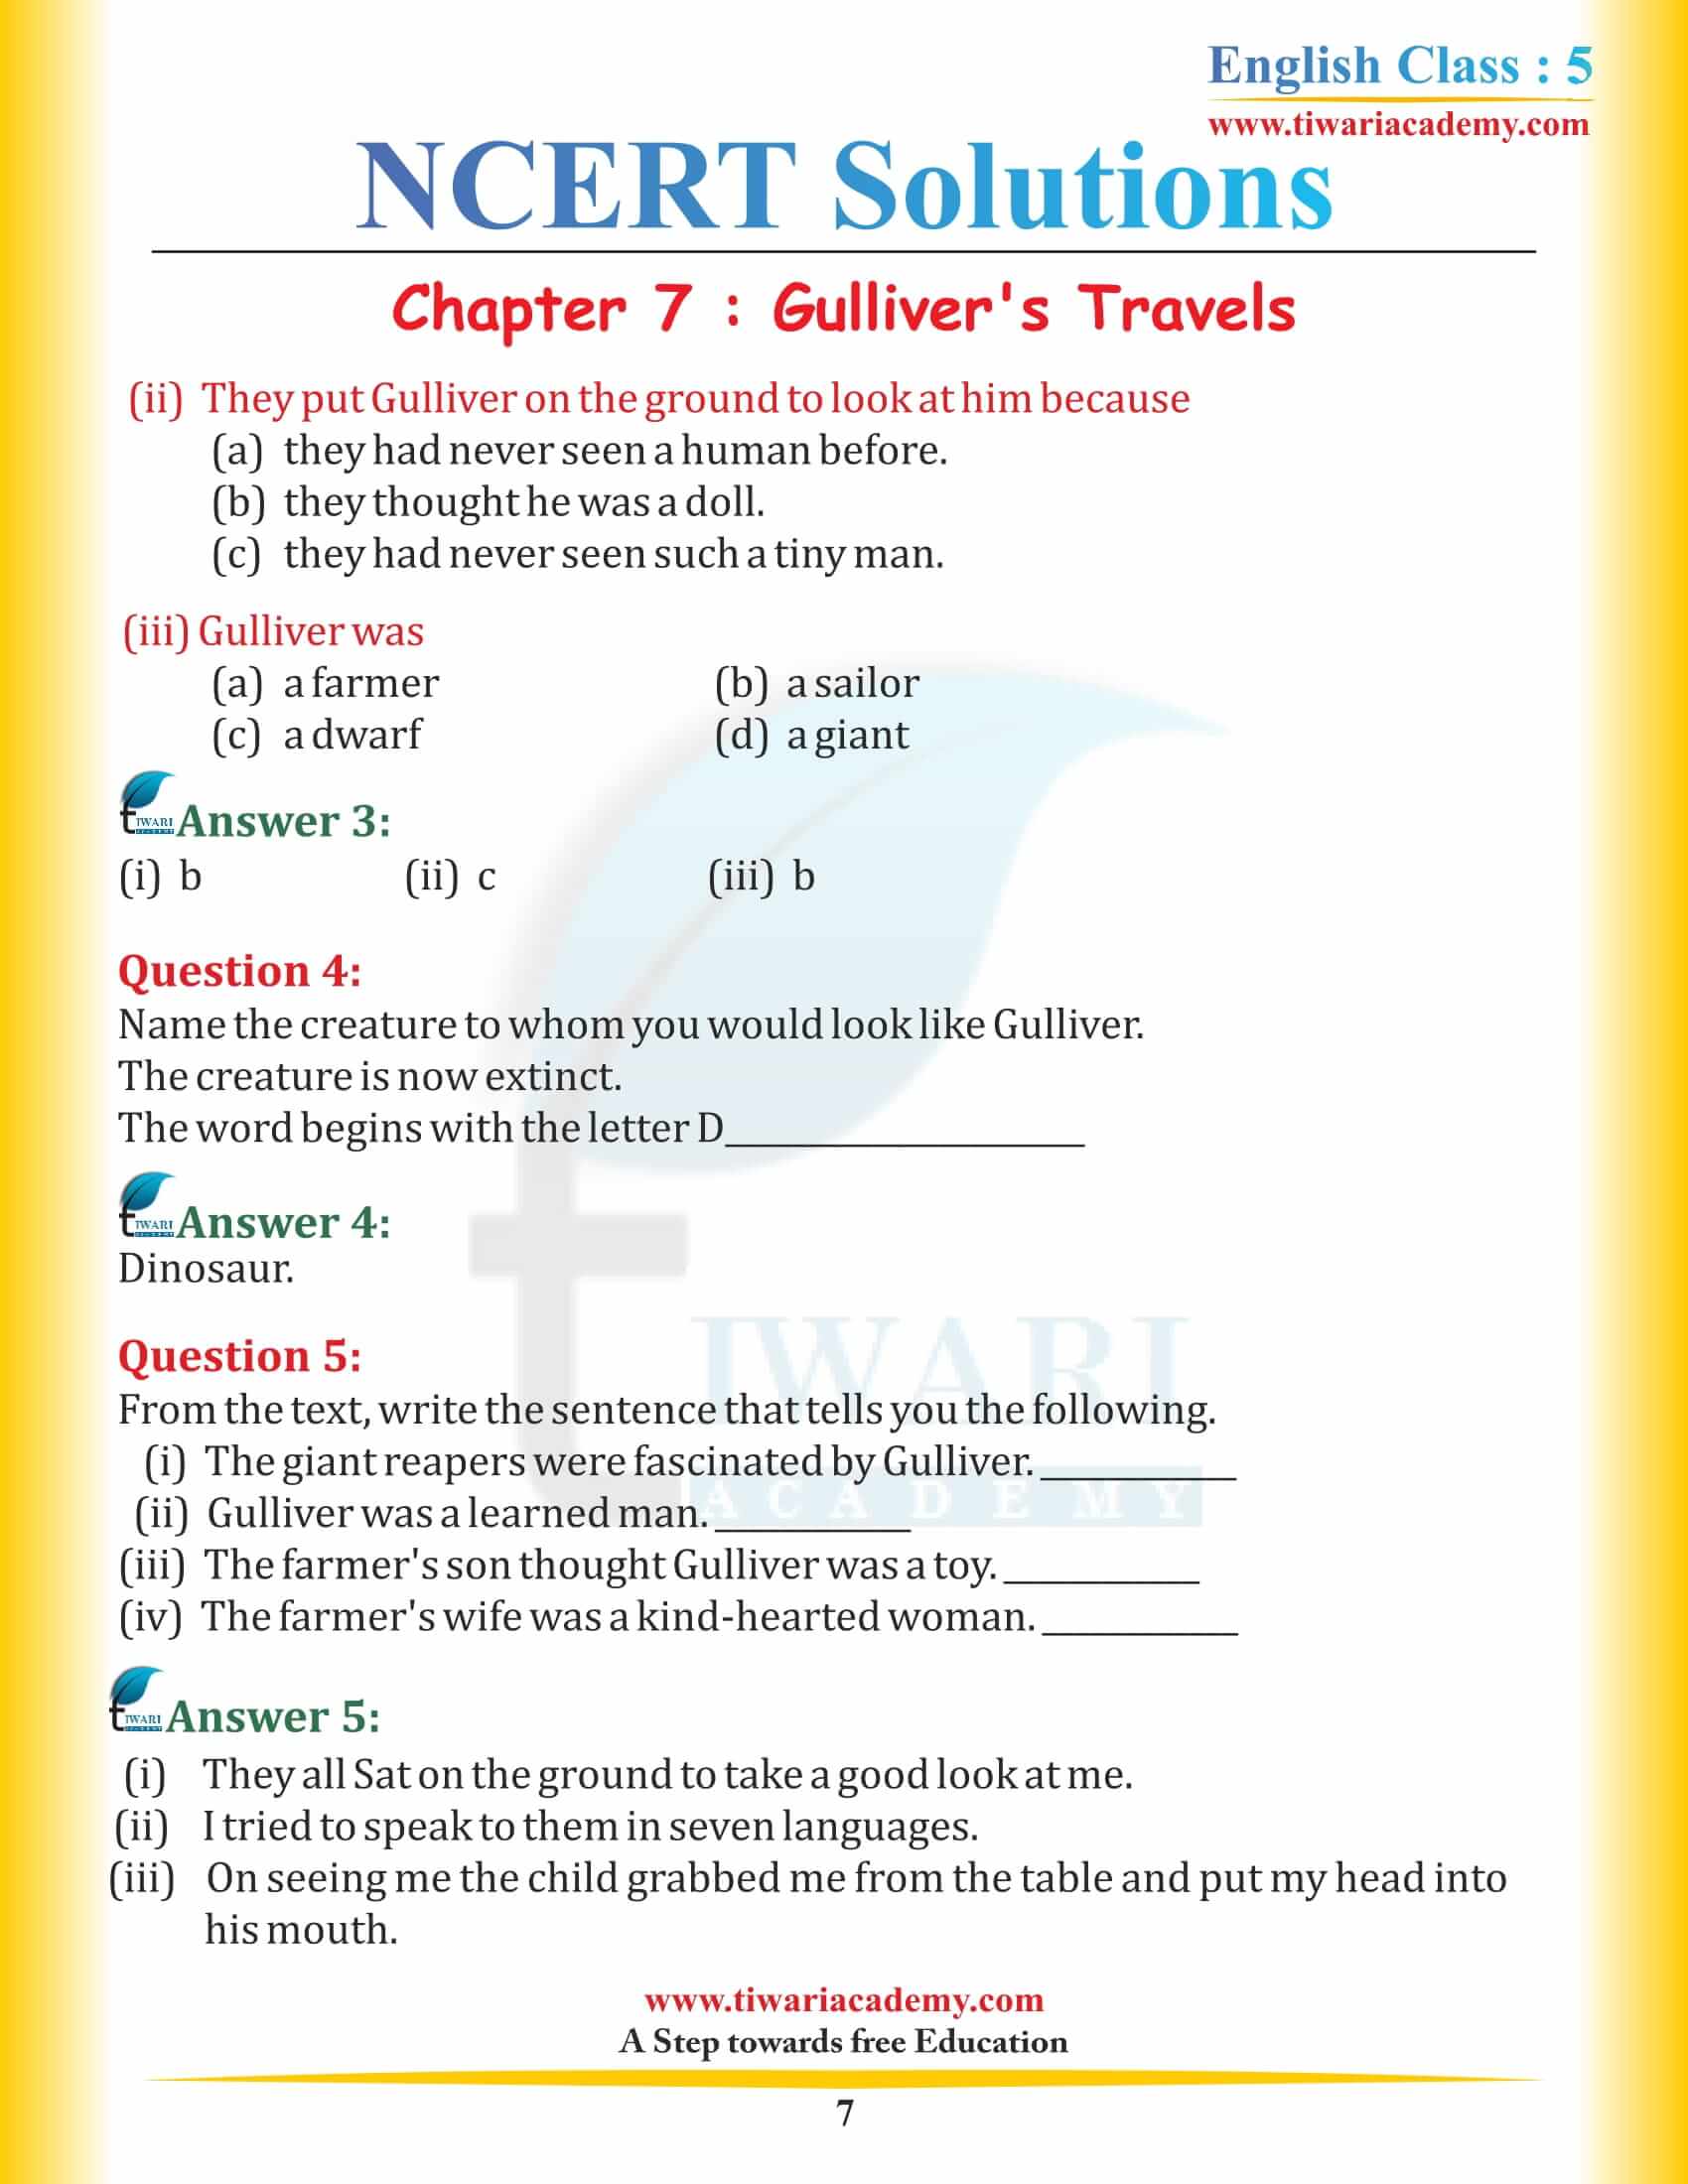 NCERT Solutions for Class 5 English Chapter 7 Gulliver’s Travels